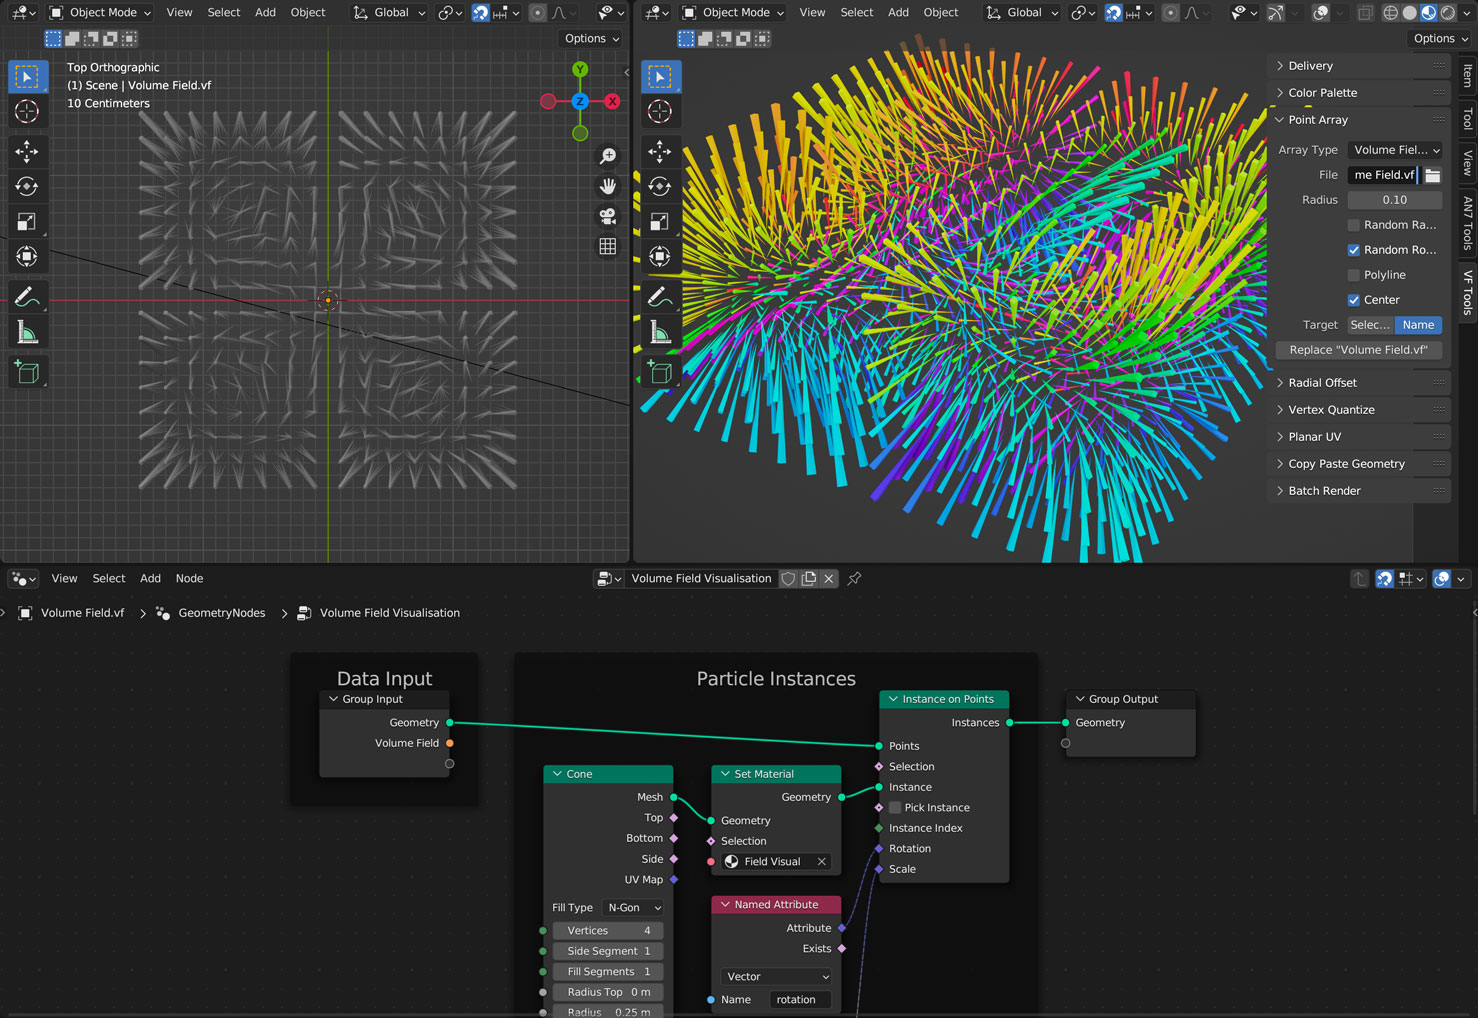 screenshot of the add-on interface in Blender showing the data import options and sample geometry nodes setup